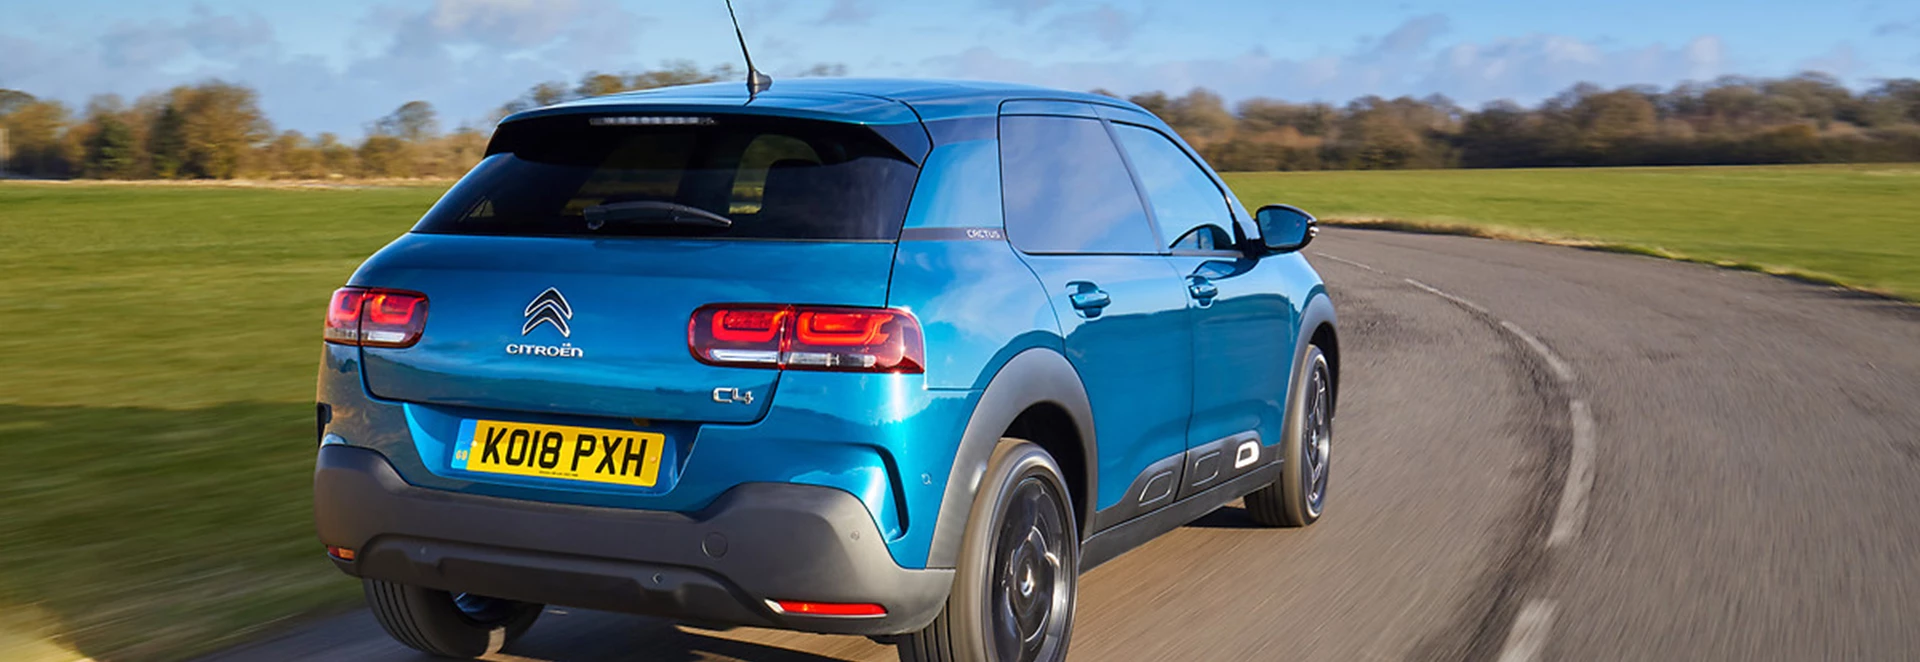 Buyer’s guide to the Citroen C4 Cactus